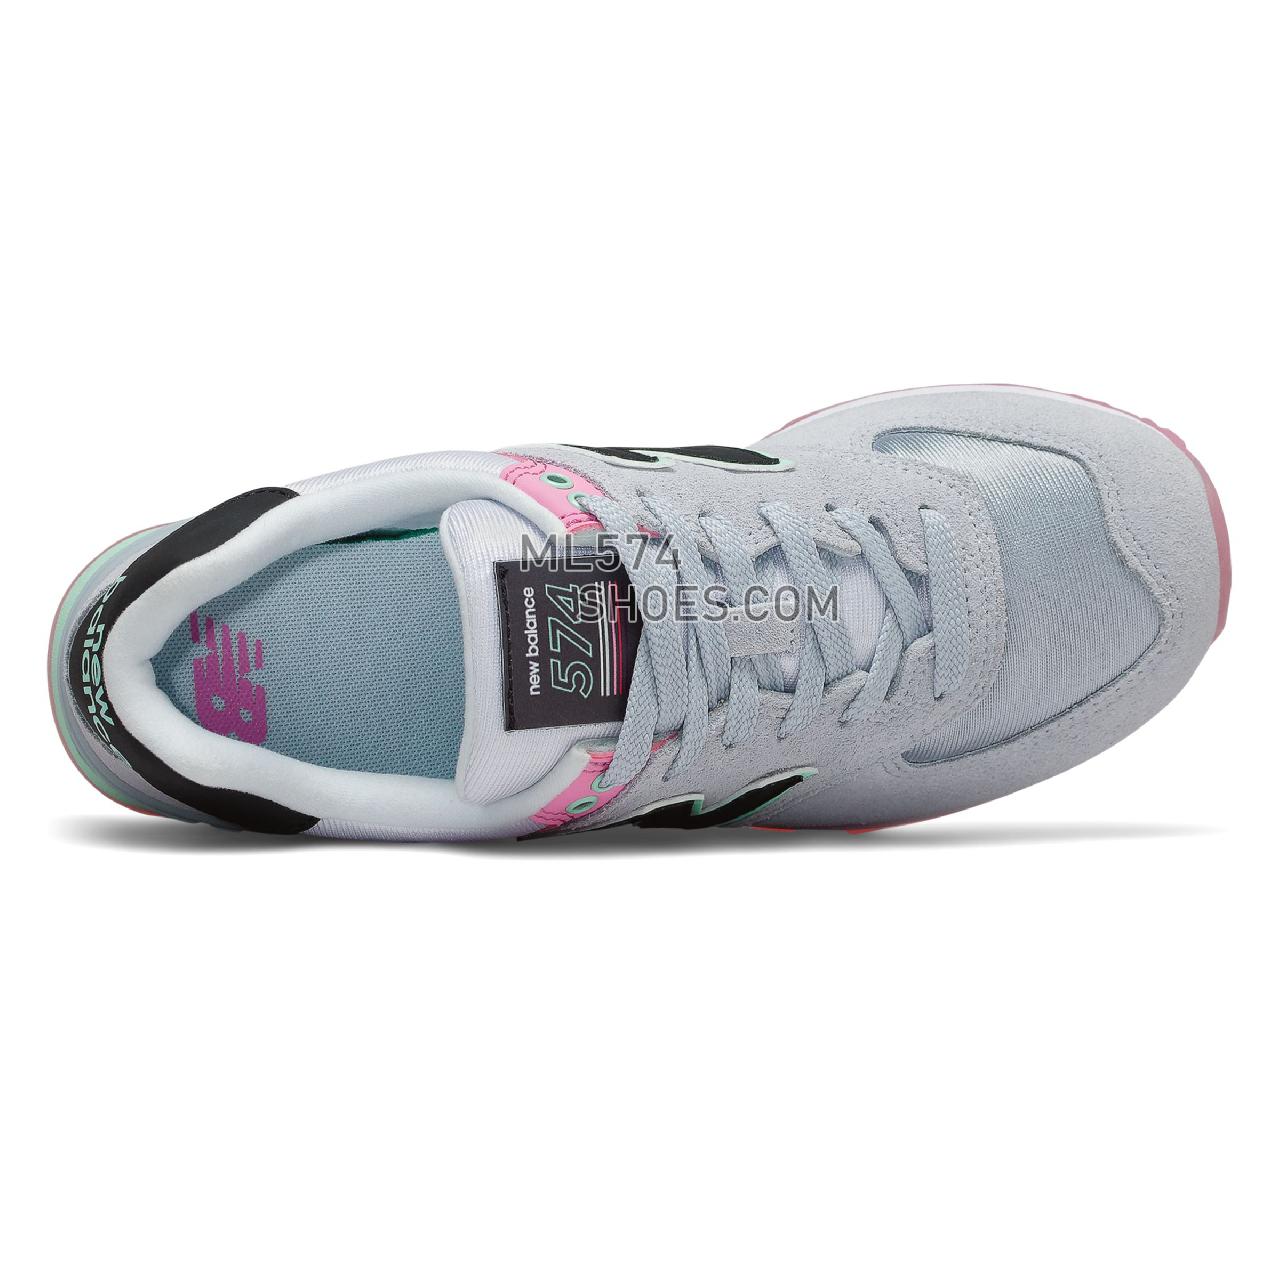 New Balance 574 - Women's Classic Sneakers - Light Cyclone with Candy Pink - WL574SAT